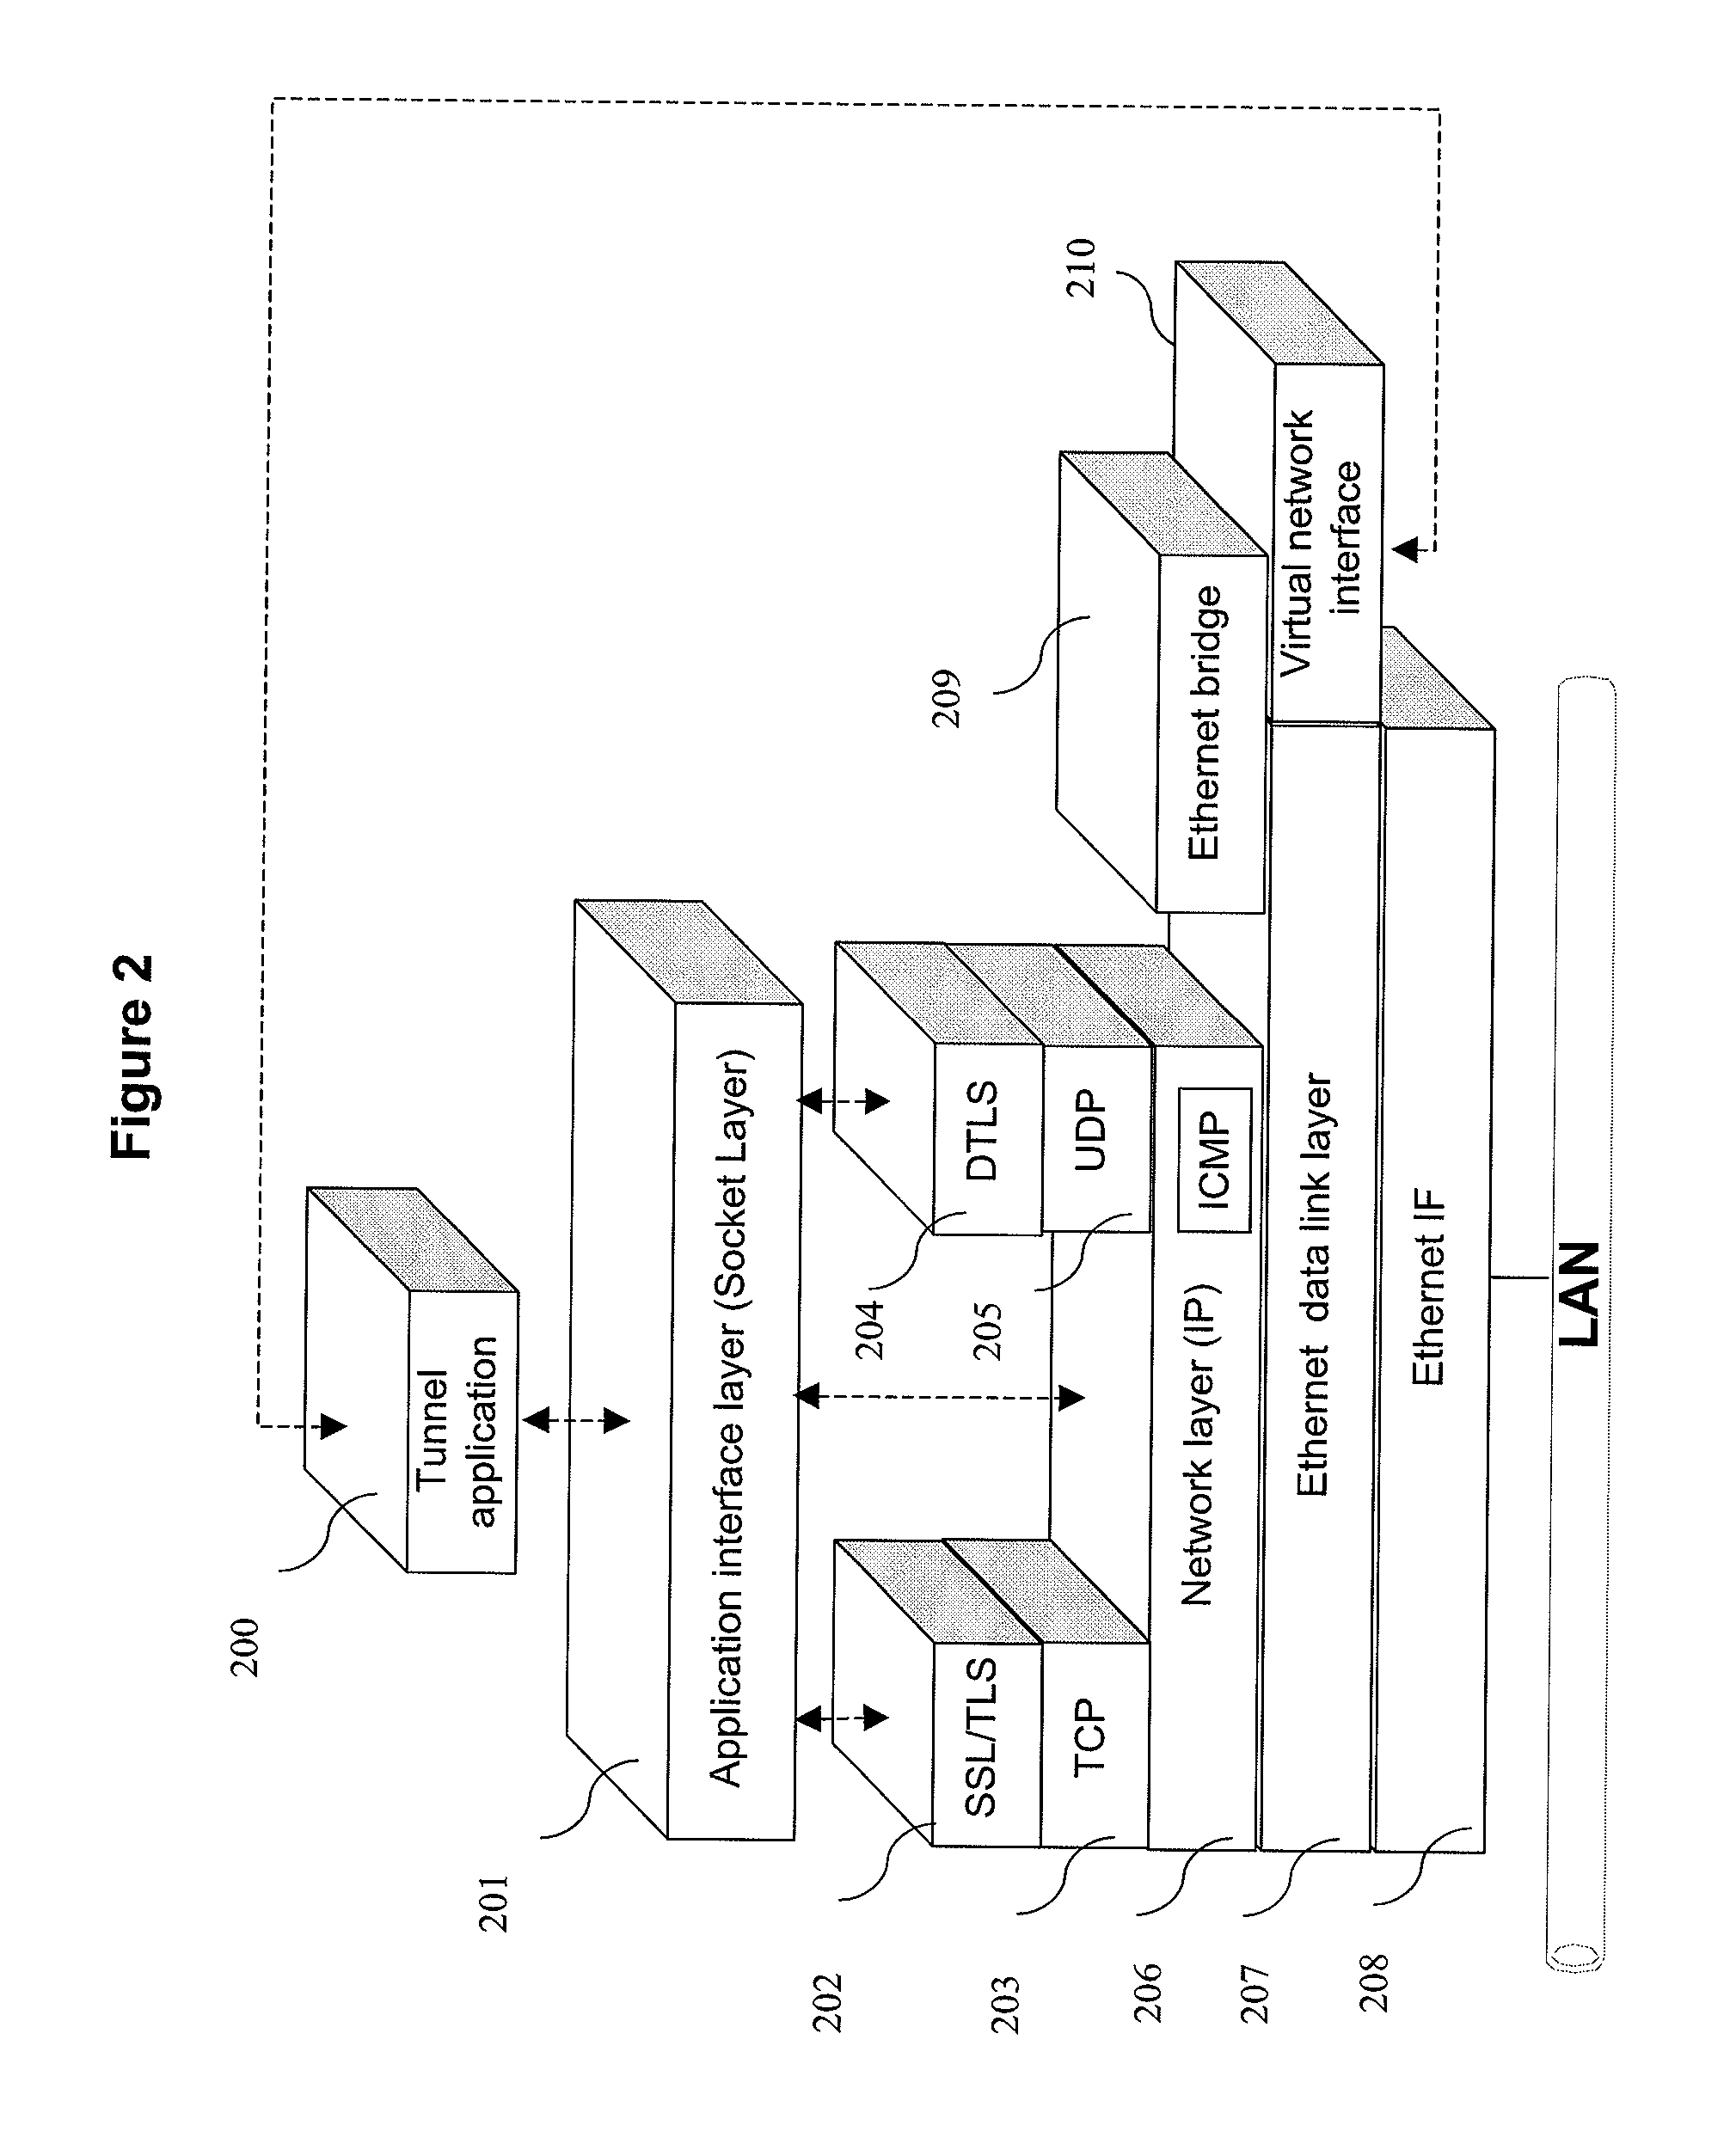 Method for transmitting a multi-channel data stream on a multi-transport tunnel, corresponding computer-readable storage means and tunnel end-points